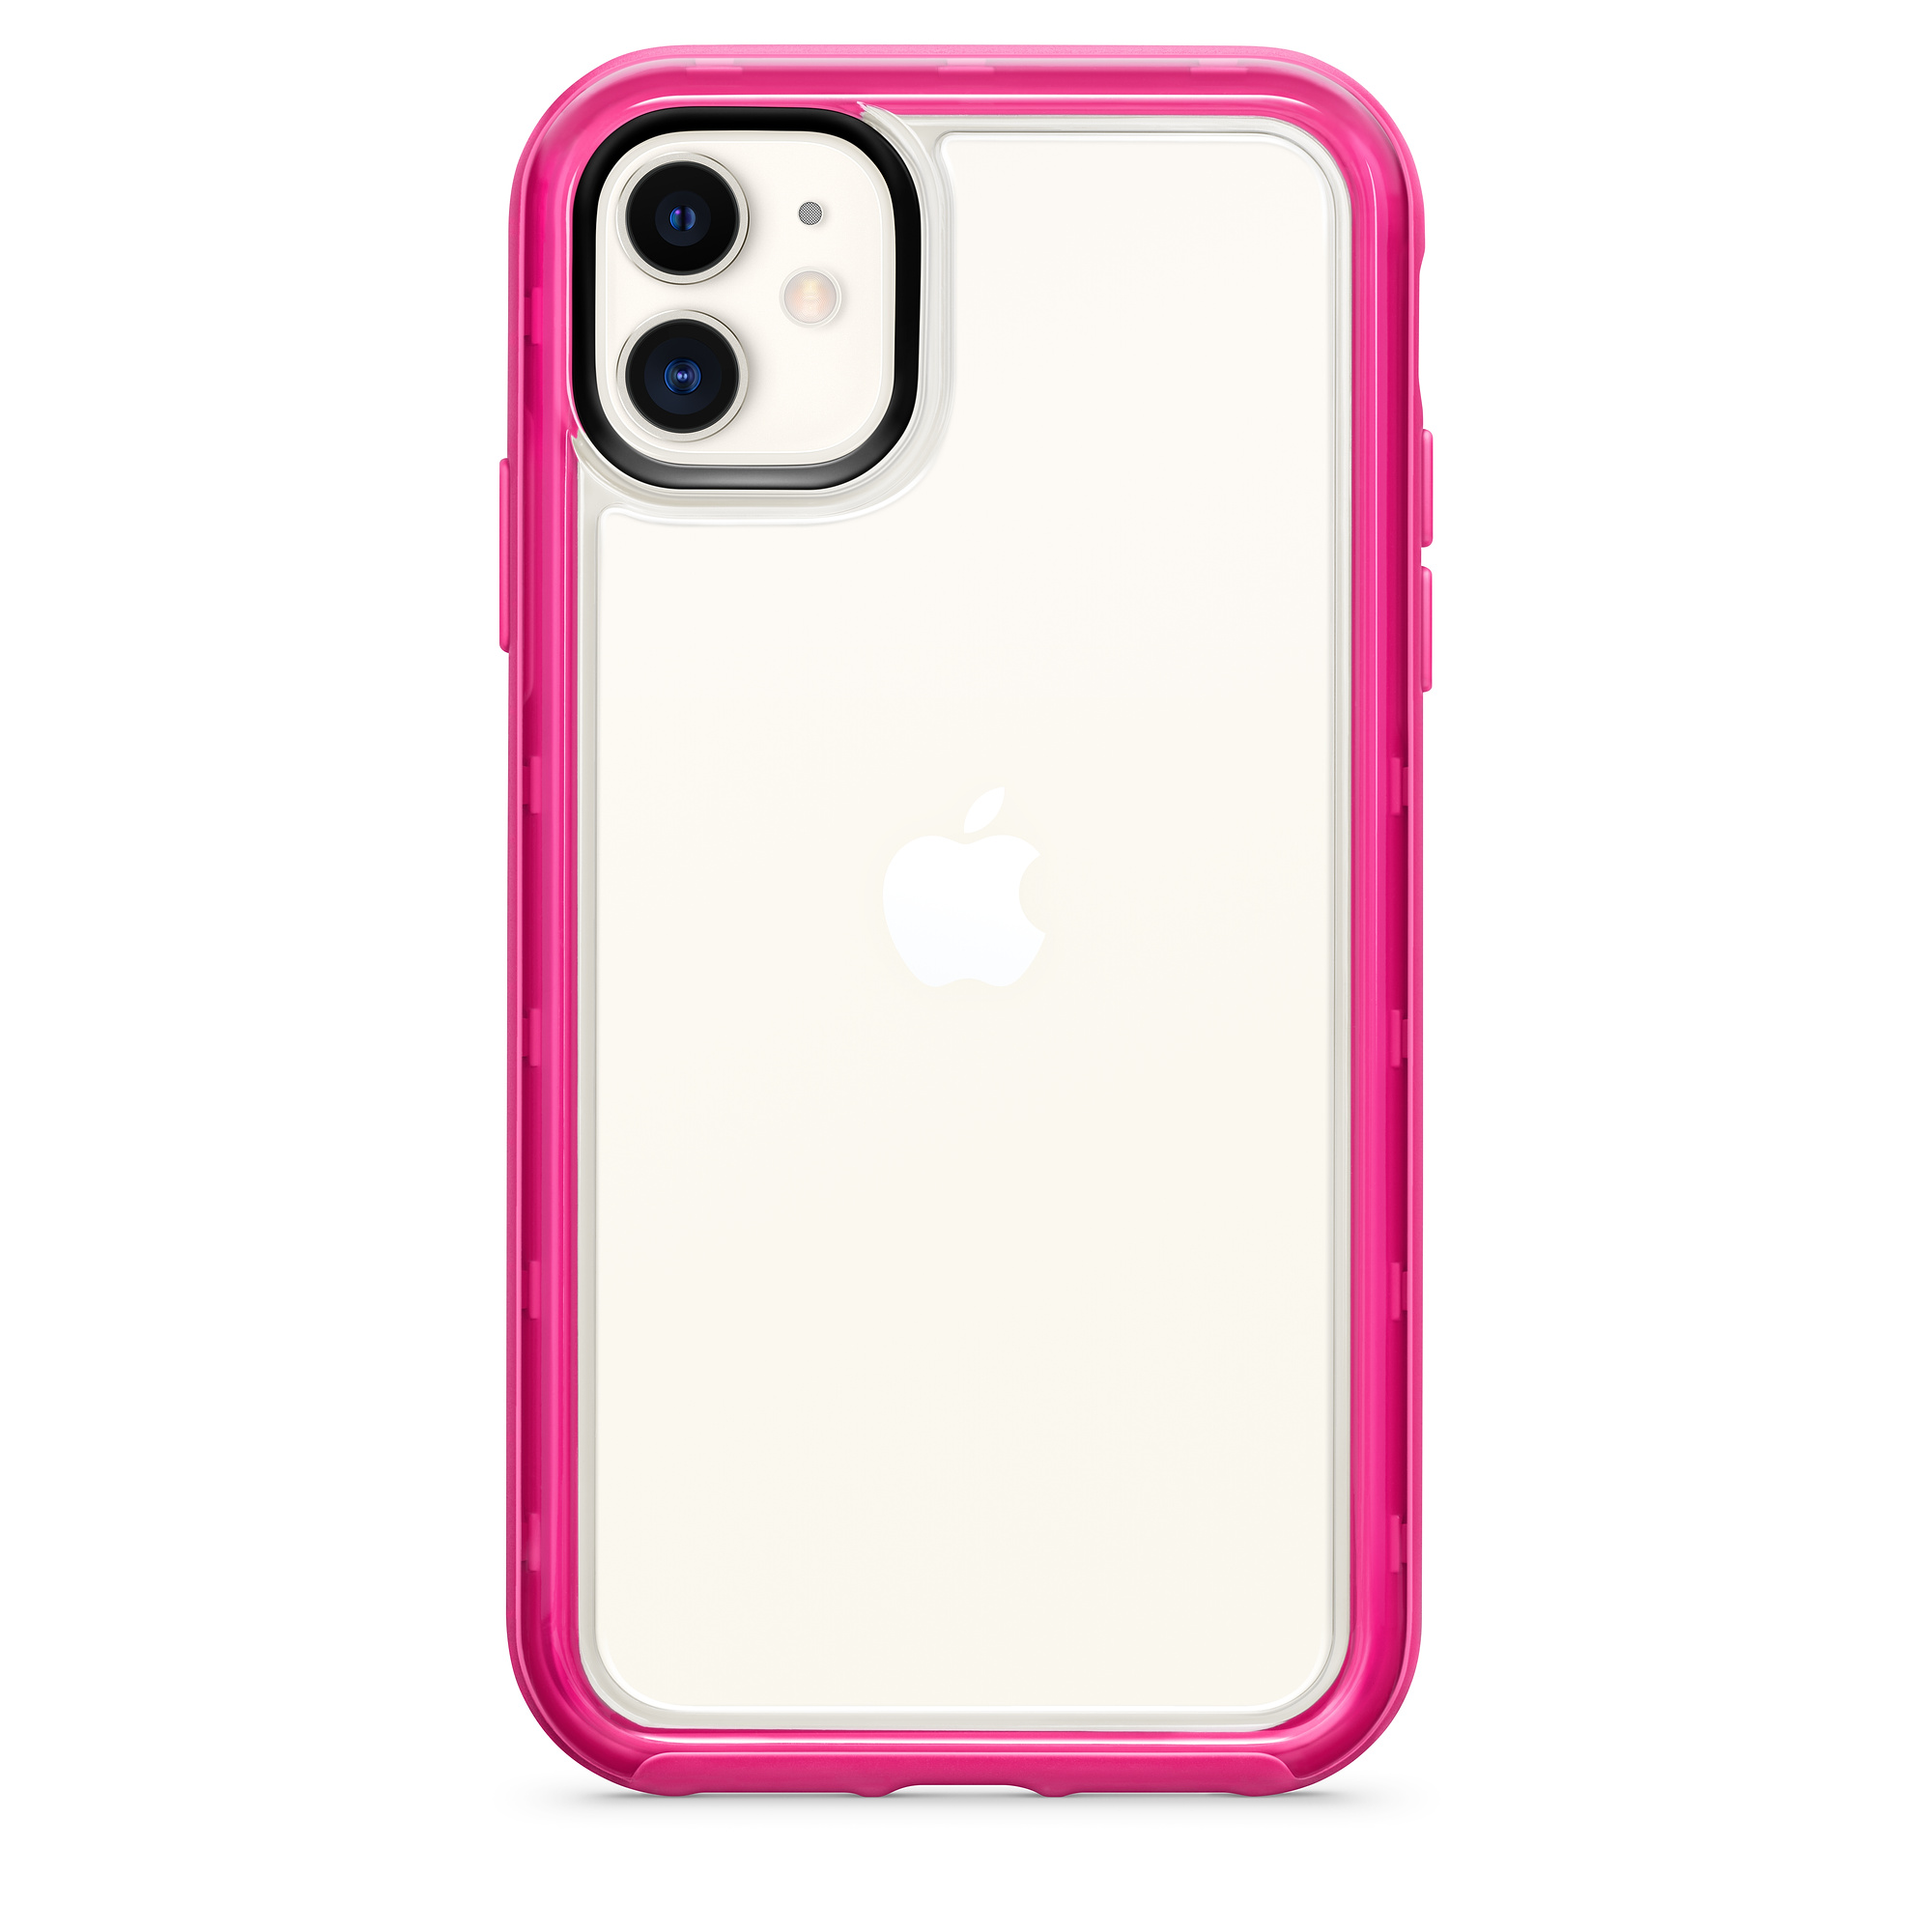 OtterBox Lumen clear case for iPhone 11